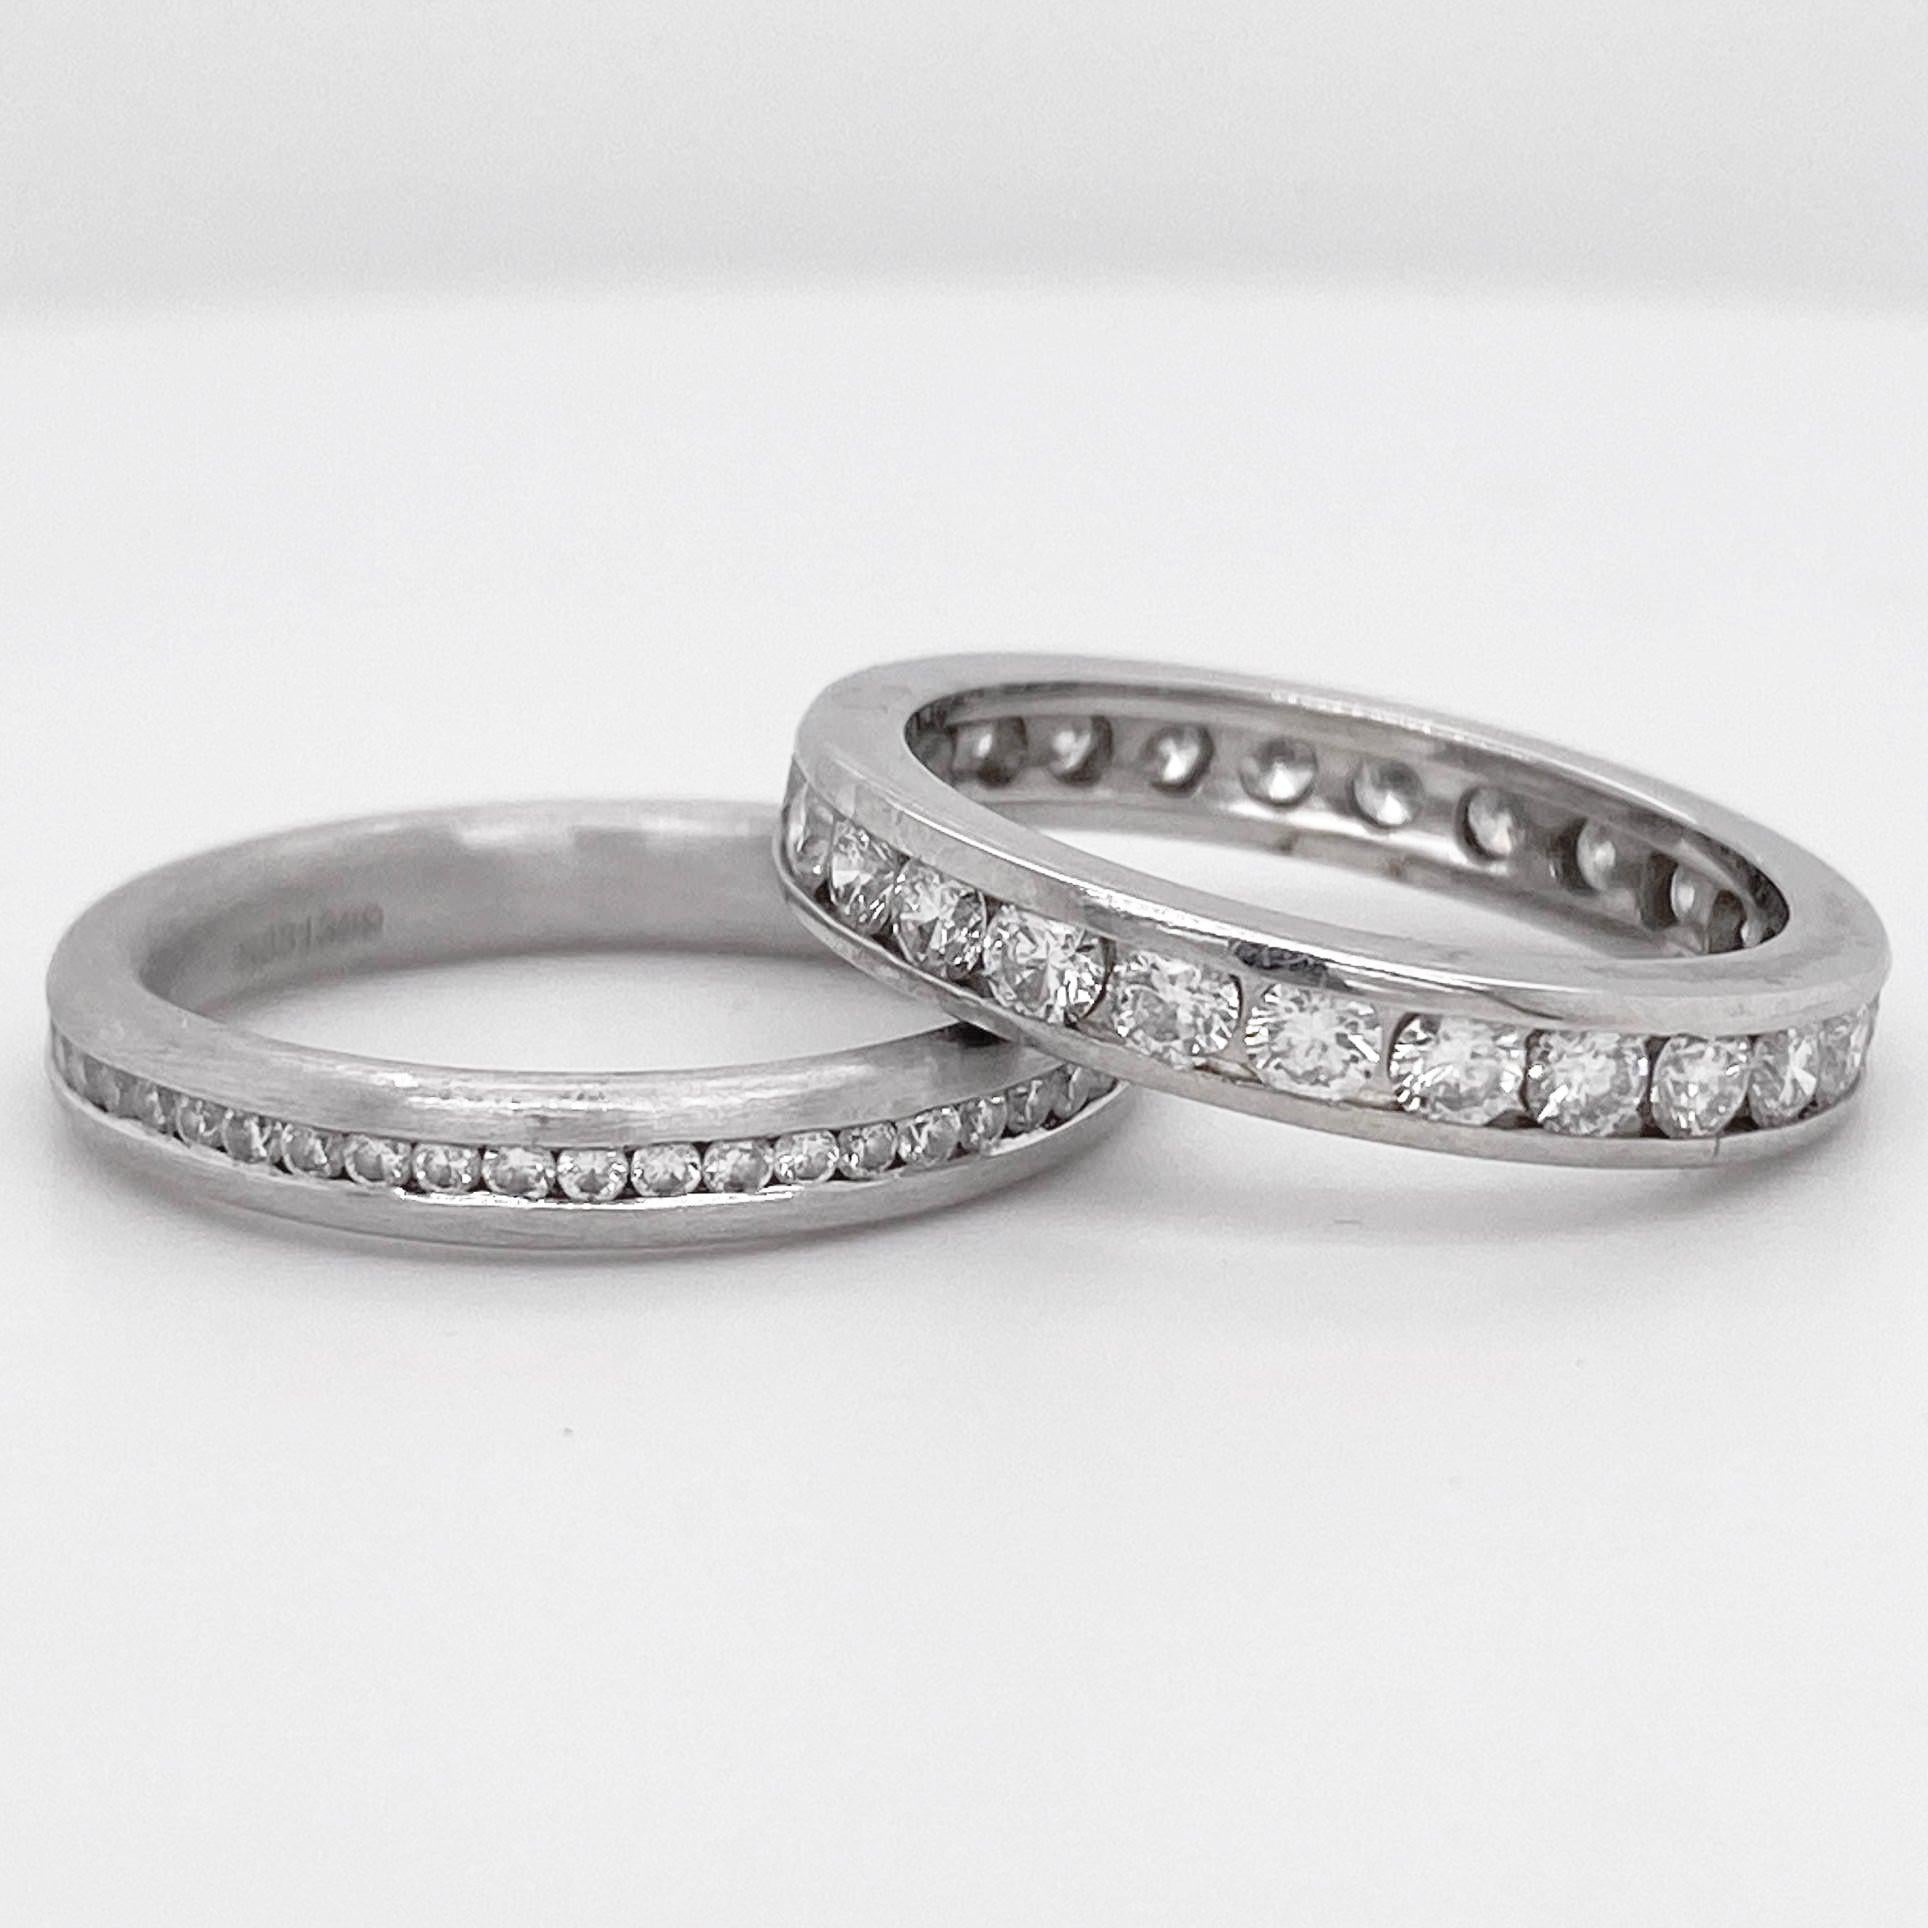 For Sale:  Channel Eternity Band Ring, White Gold, 1.50 Carat Diamond, Infinity 3